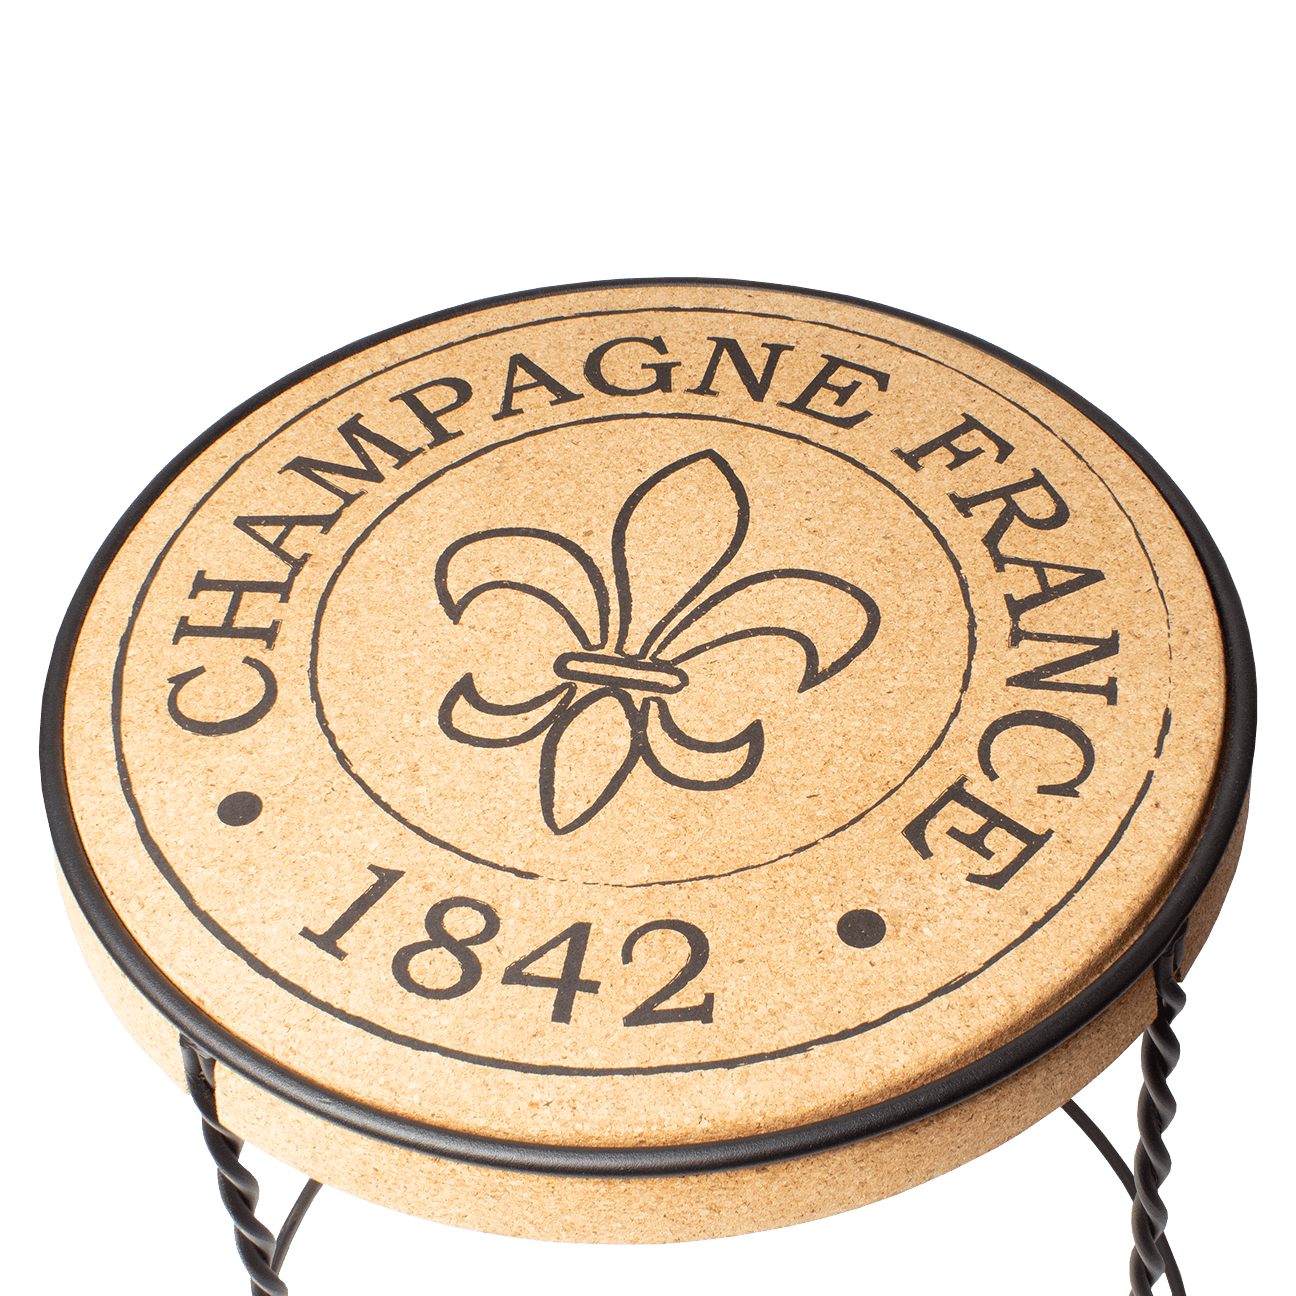 Overhead view of a table with a cork top and metal base. "Champagne France, 1842" printed on the cork top. 